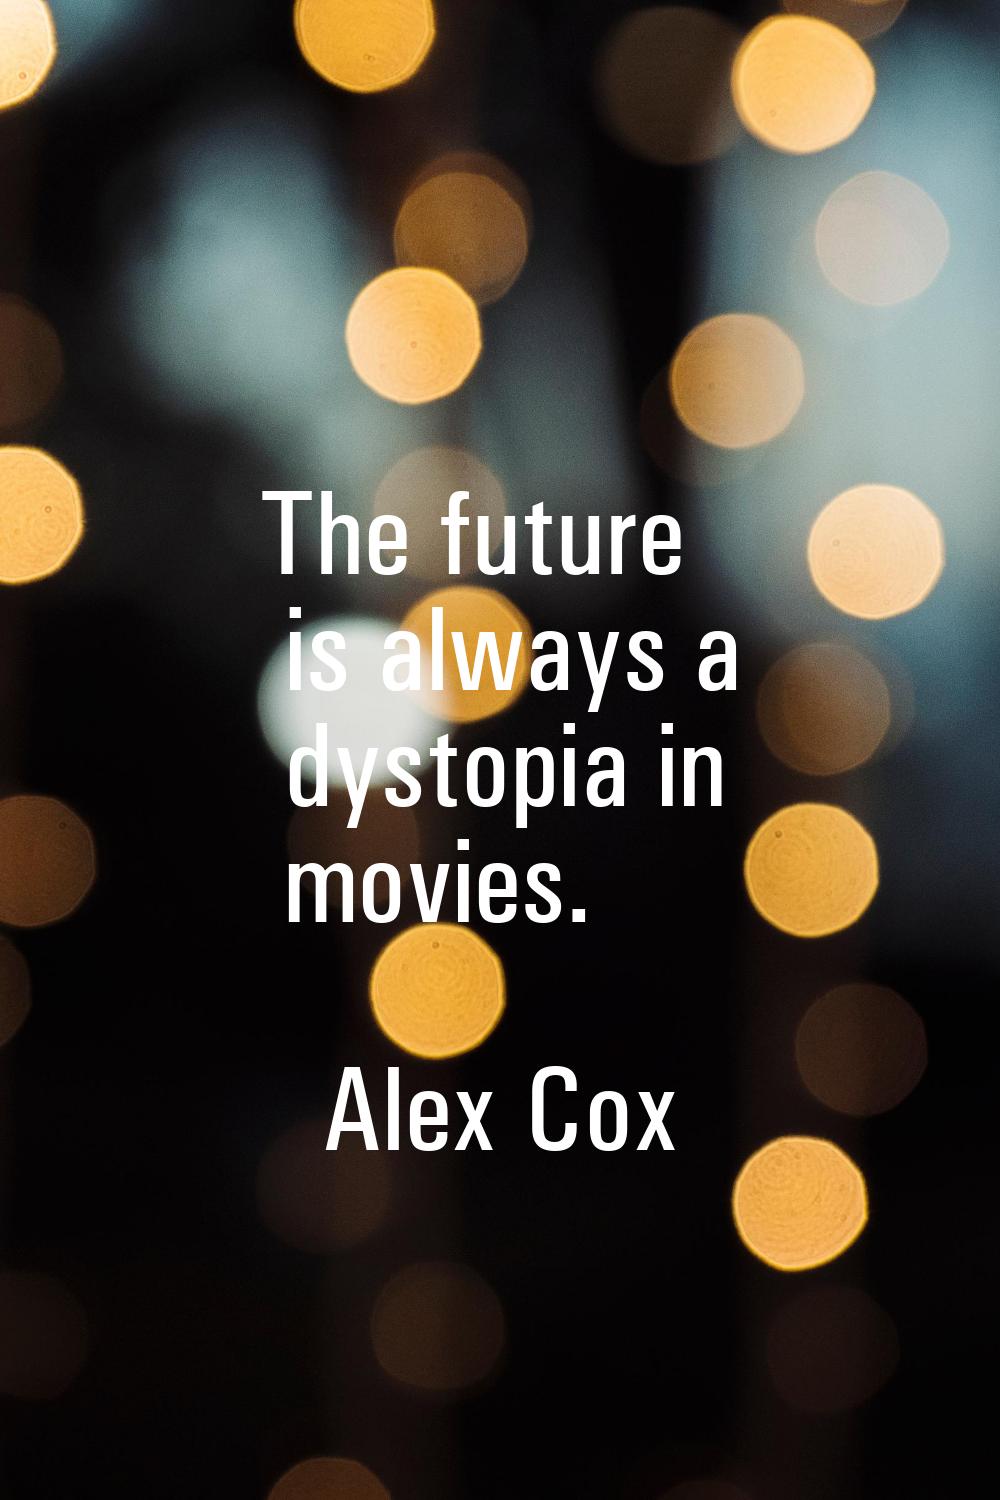 The future is always a dystopia in movies.